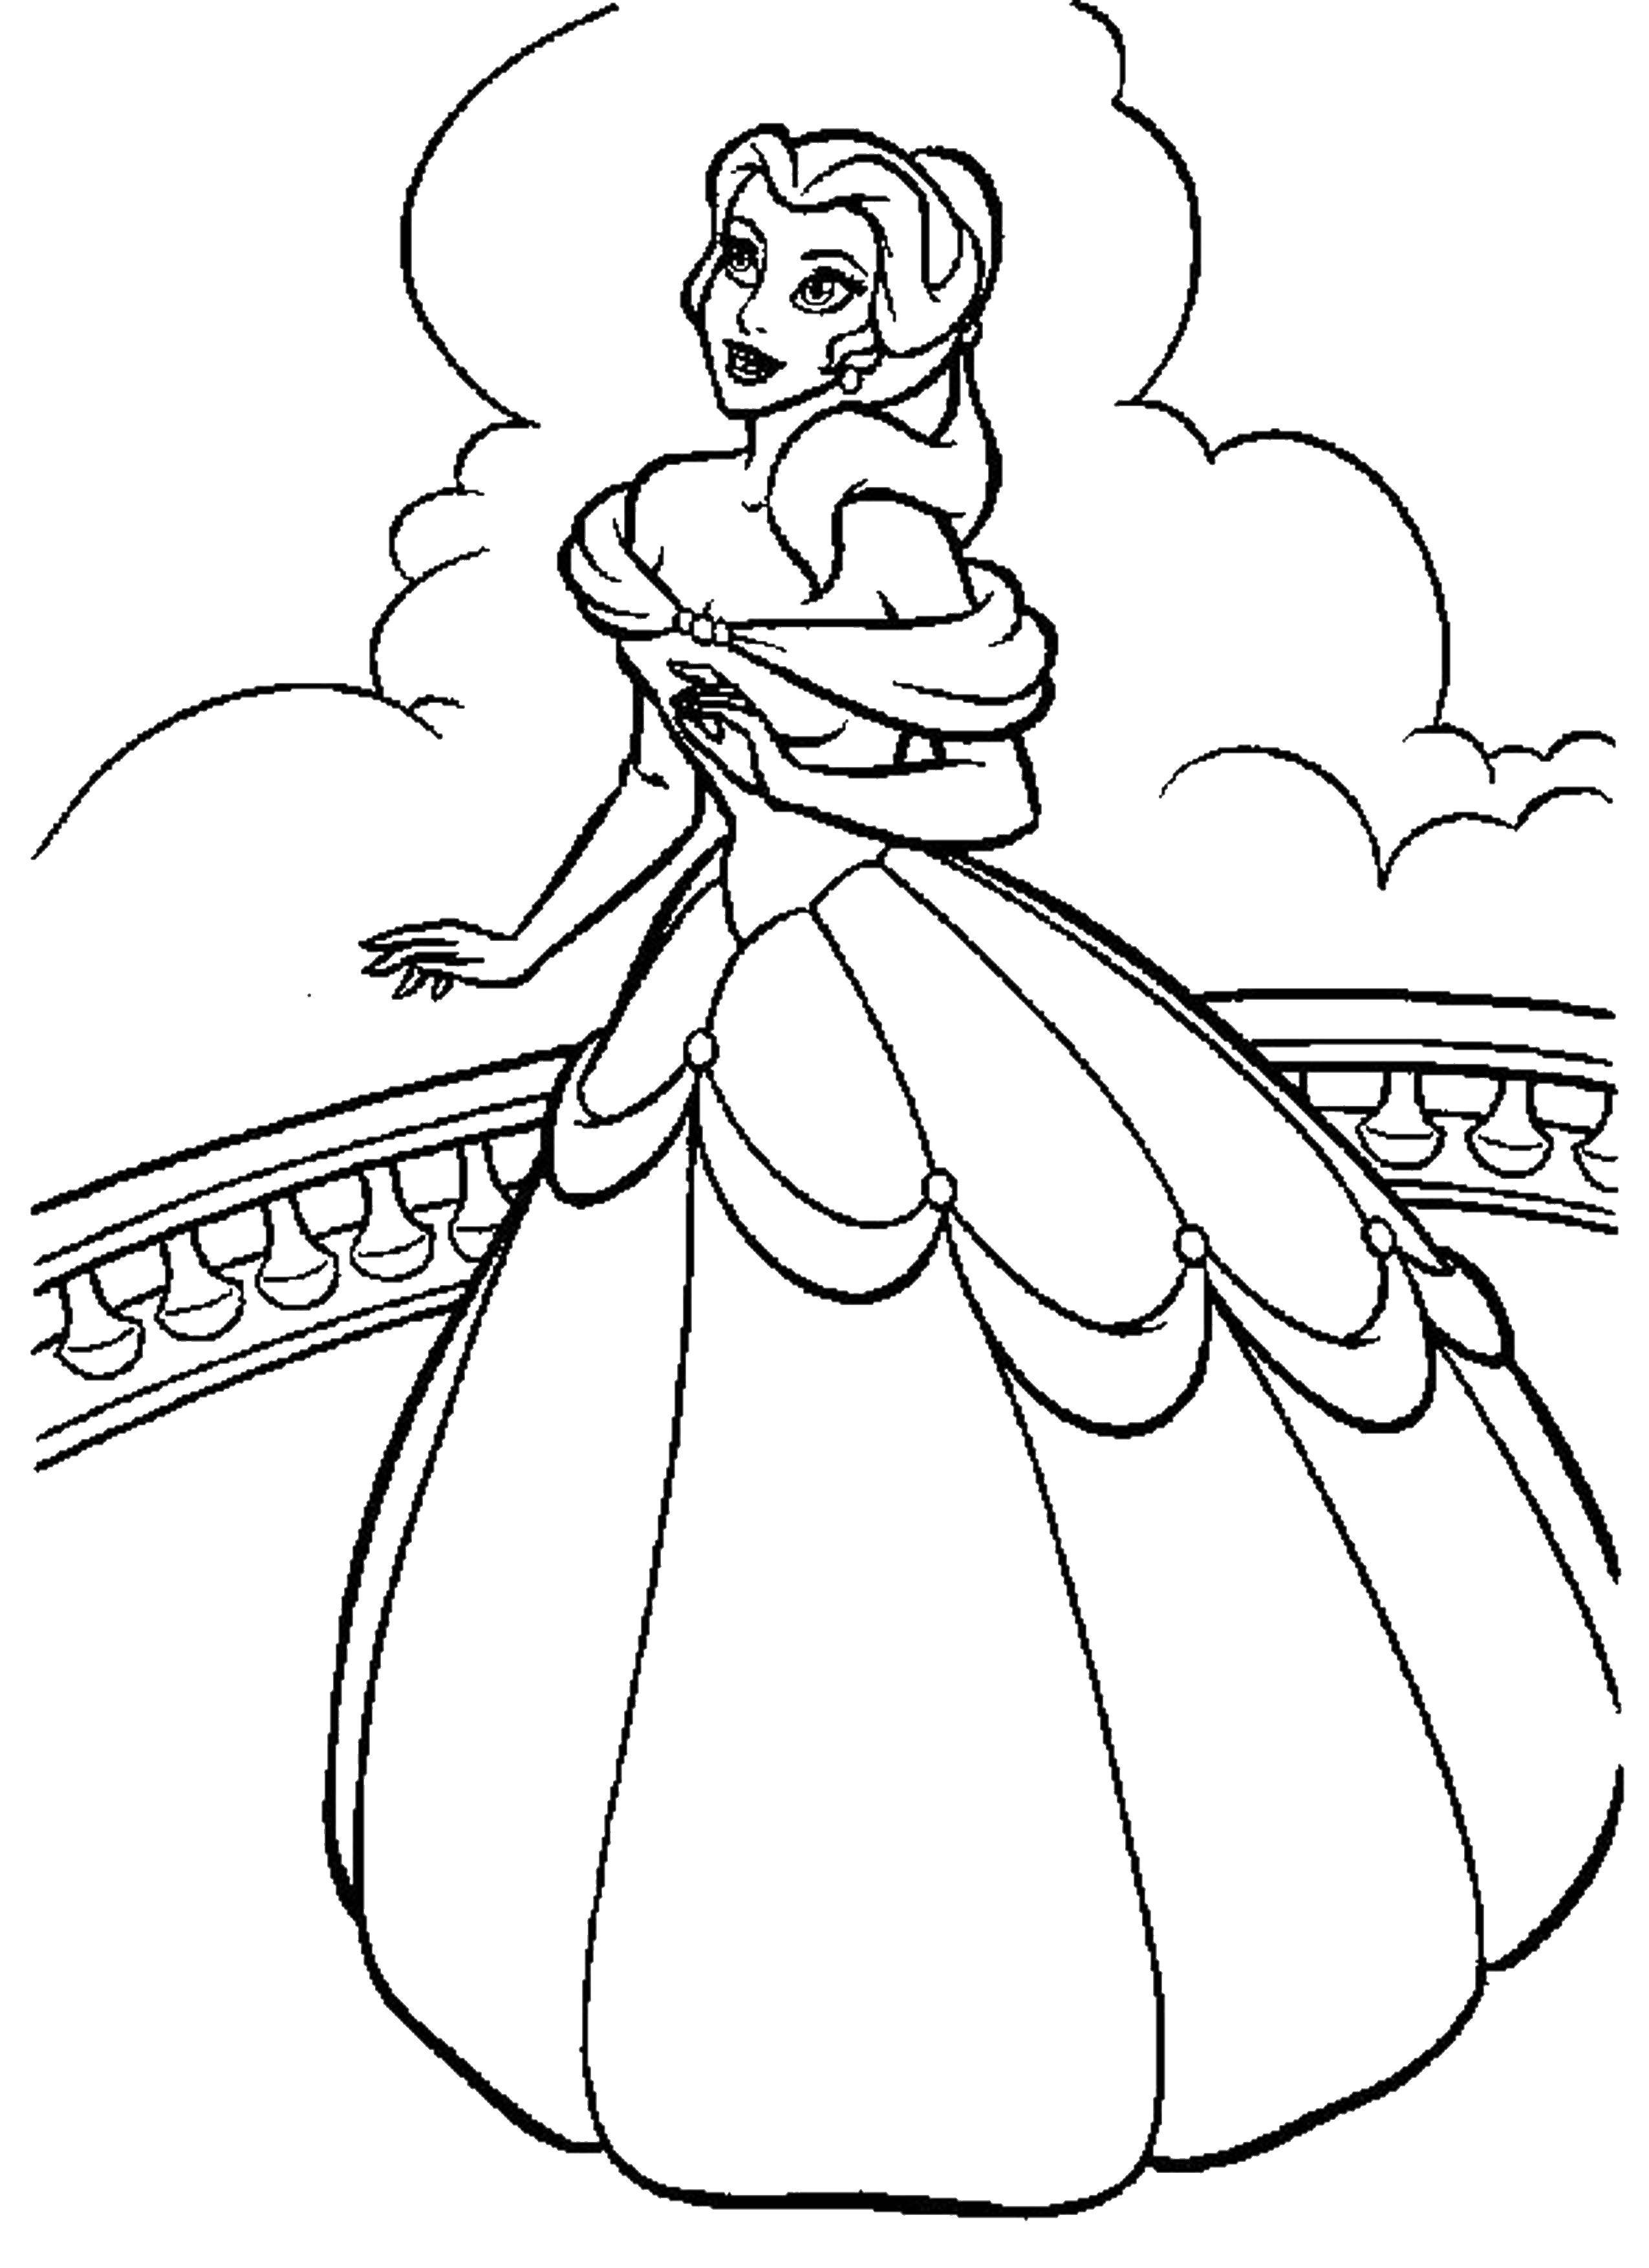 Coloring Belle on the terrace. Category Princess. Tags:  Beauty and the Beast, Disney.